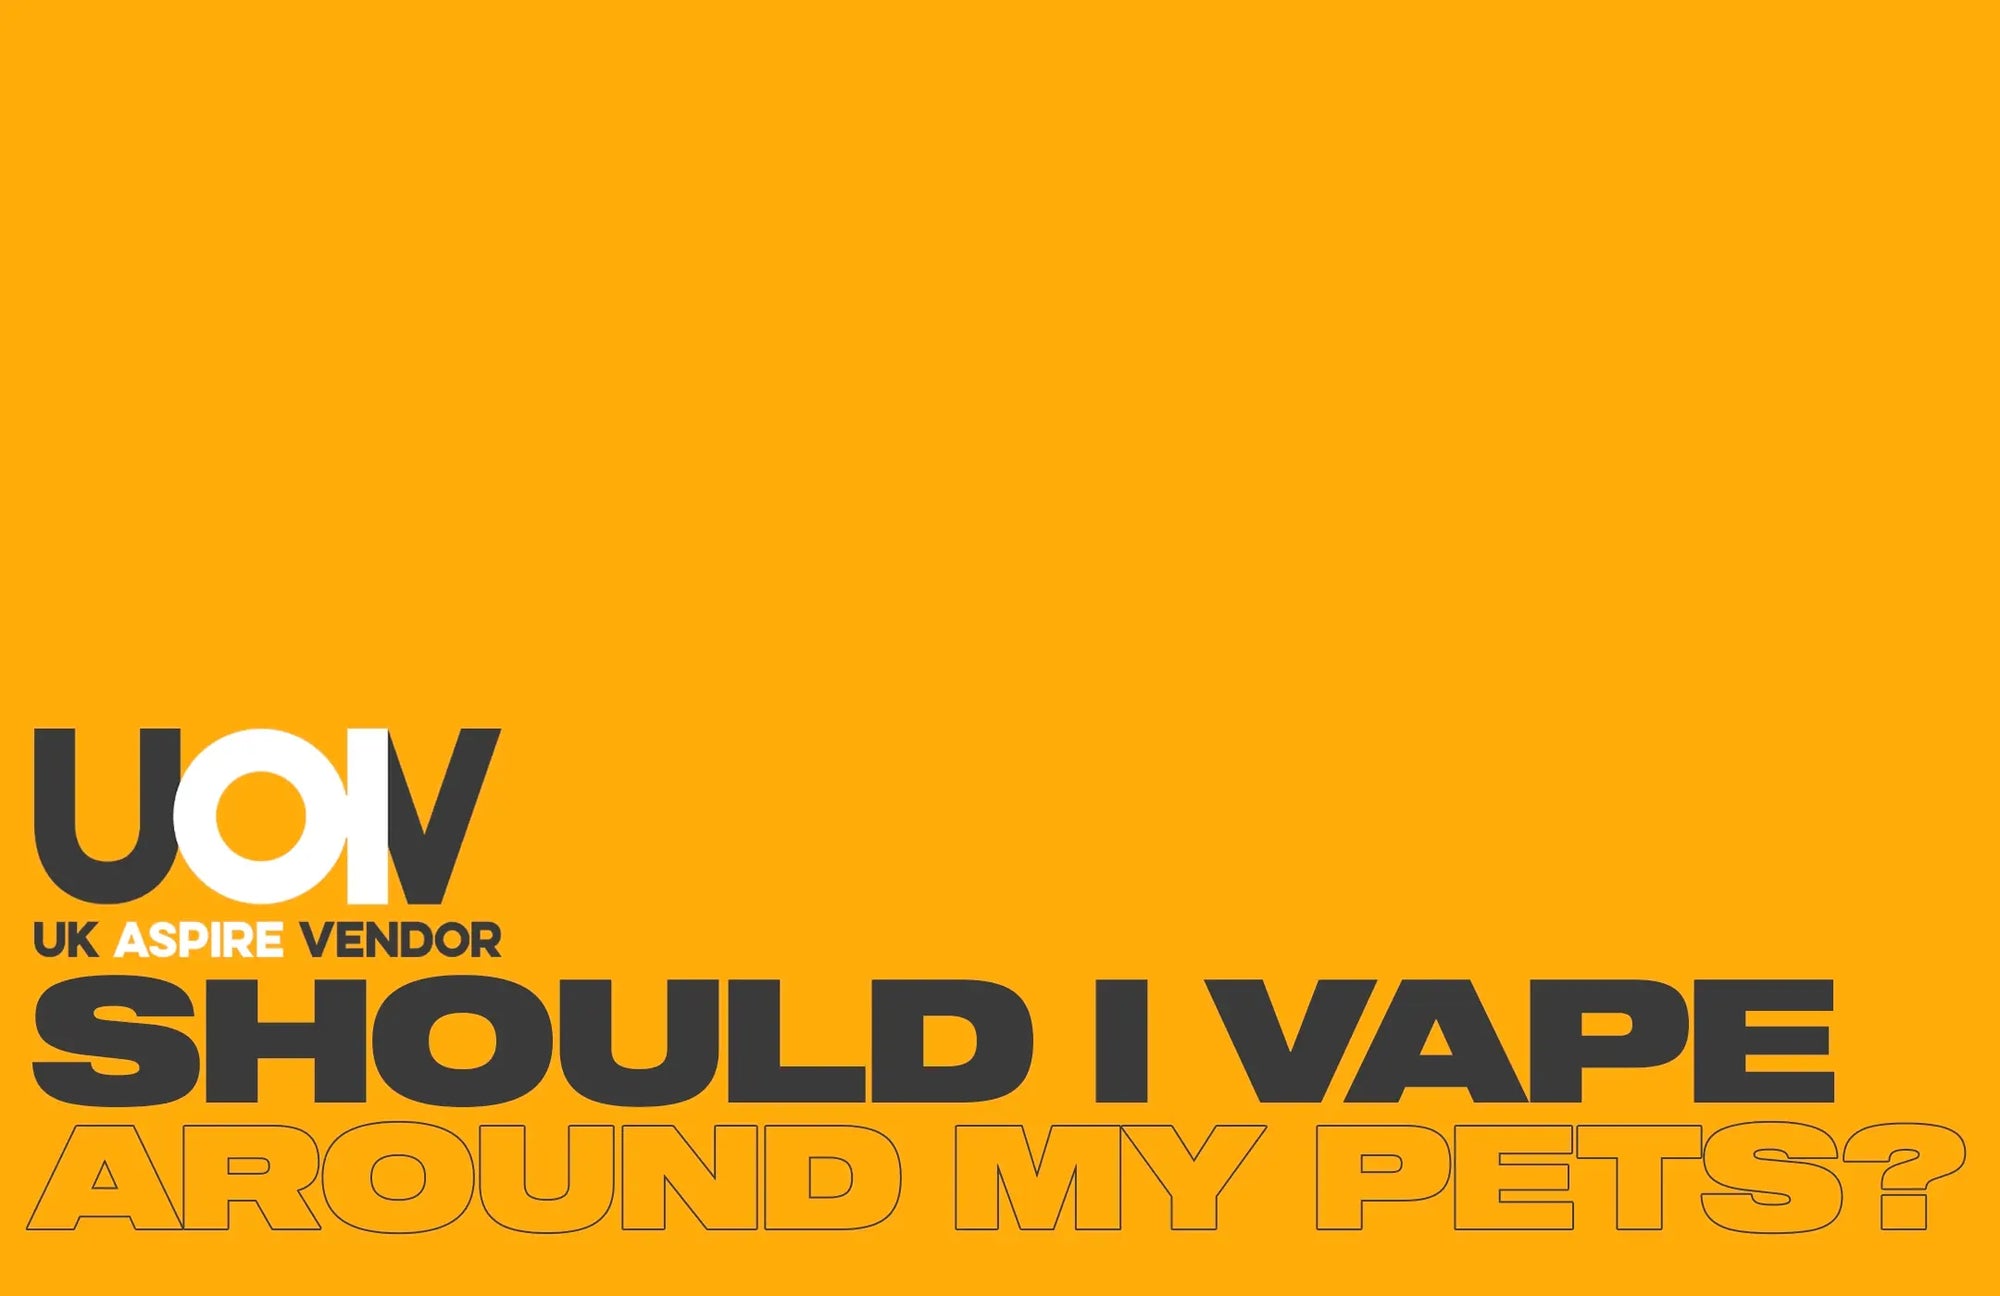 Vaping around pets can pose risks, including potential nicotine poisoning and respiratory irritation. Keep e-cigarette products out of reach and consider the well-being of all household members.